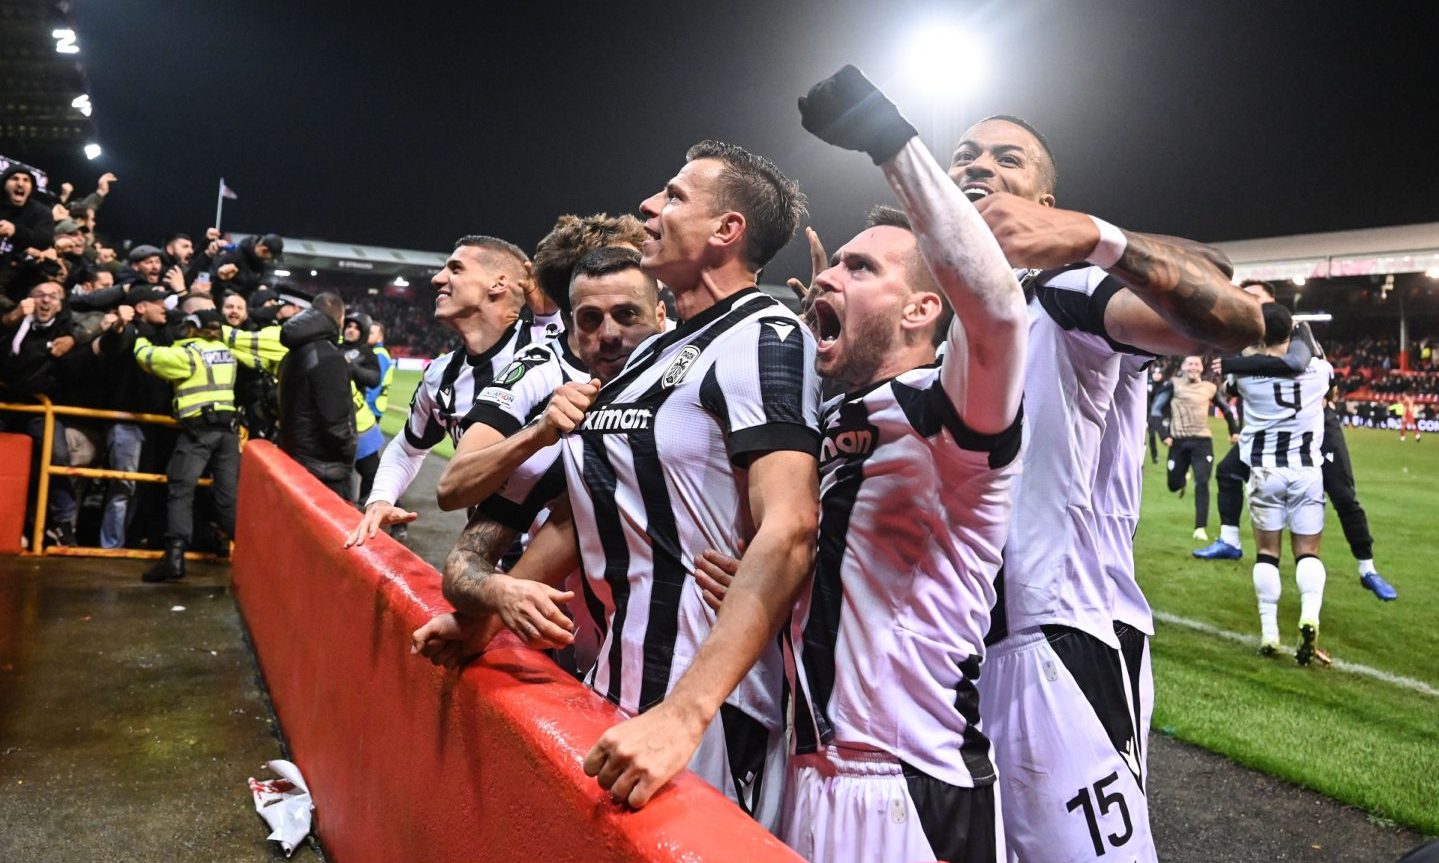 The PAOK players celebrating with their fans after scoring against the dons